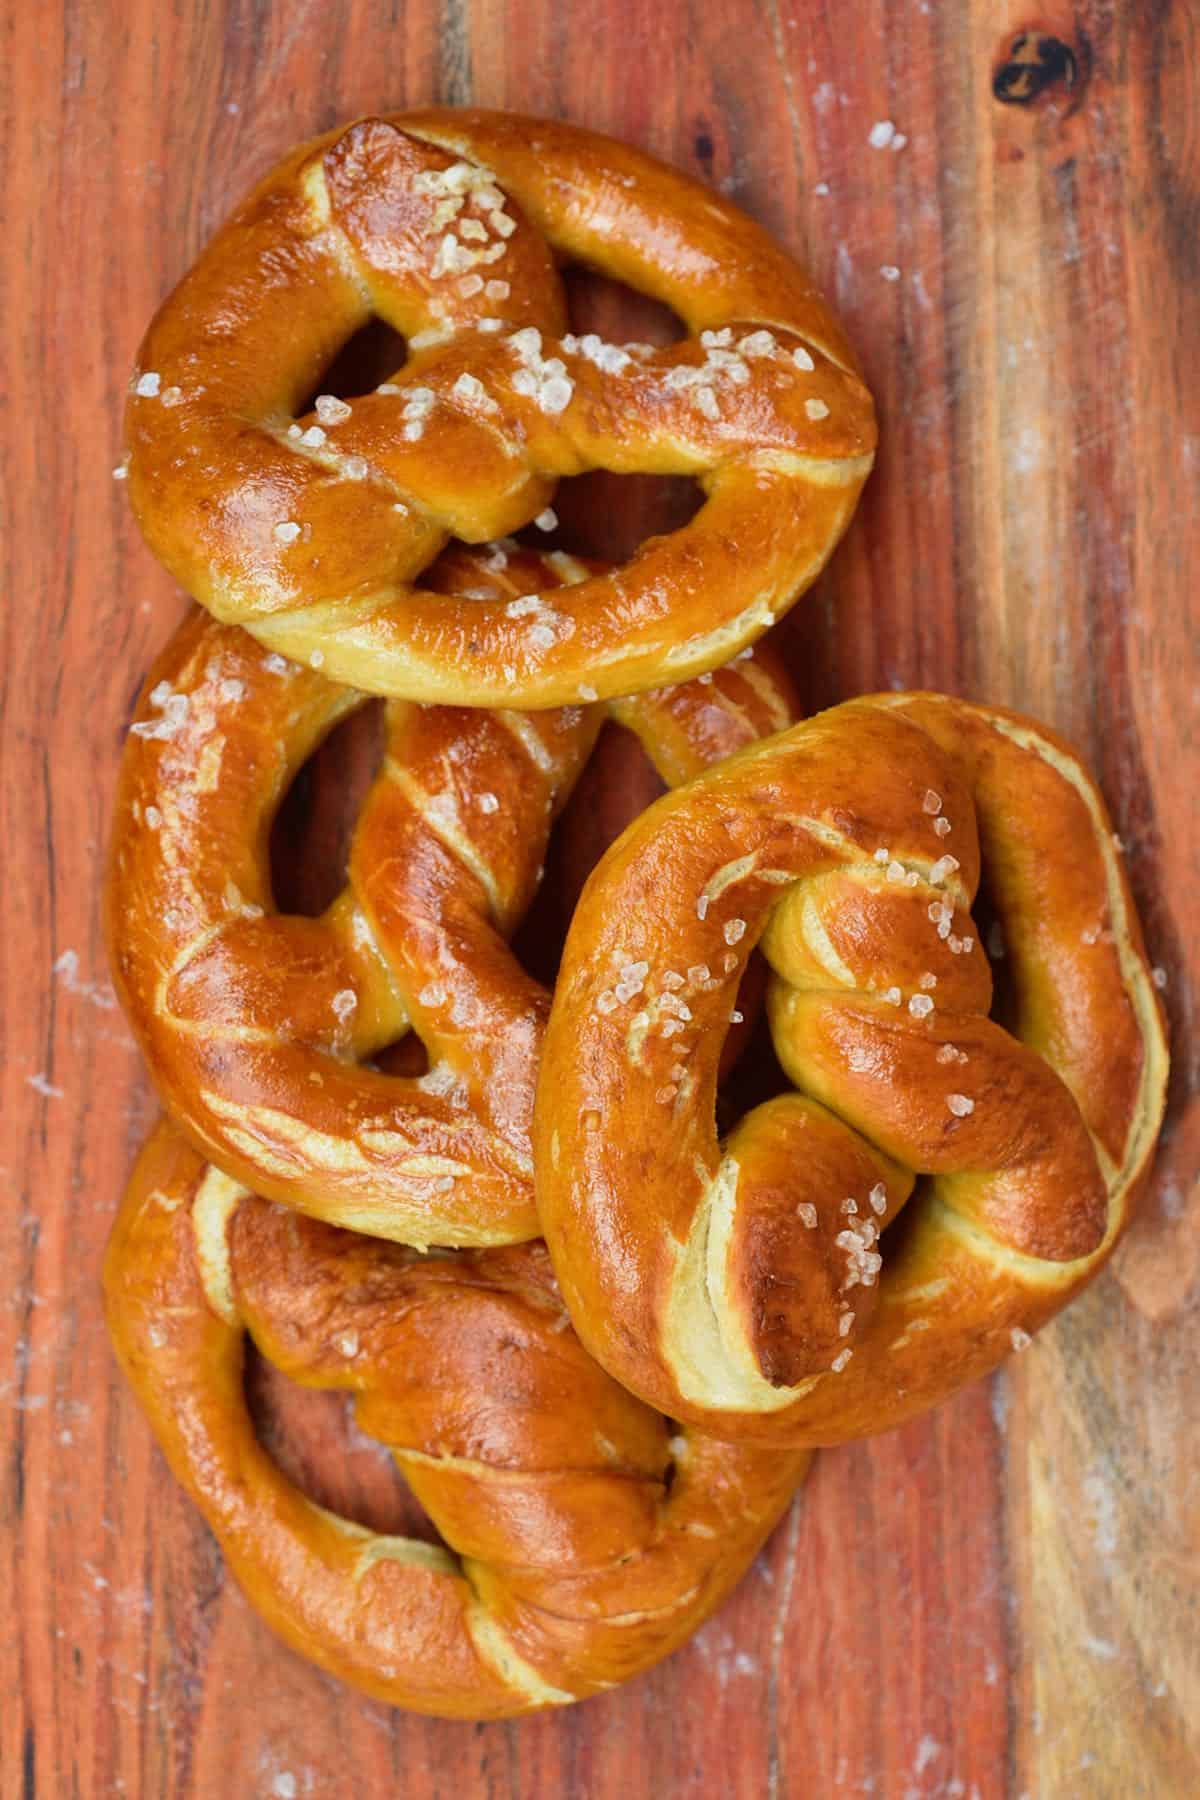 Four pretzels overlapping on a flat wooden surface